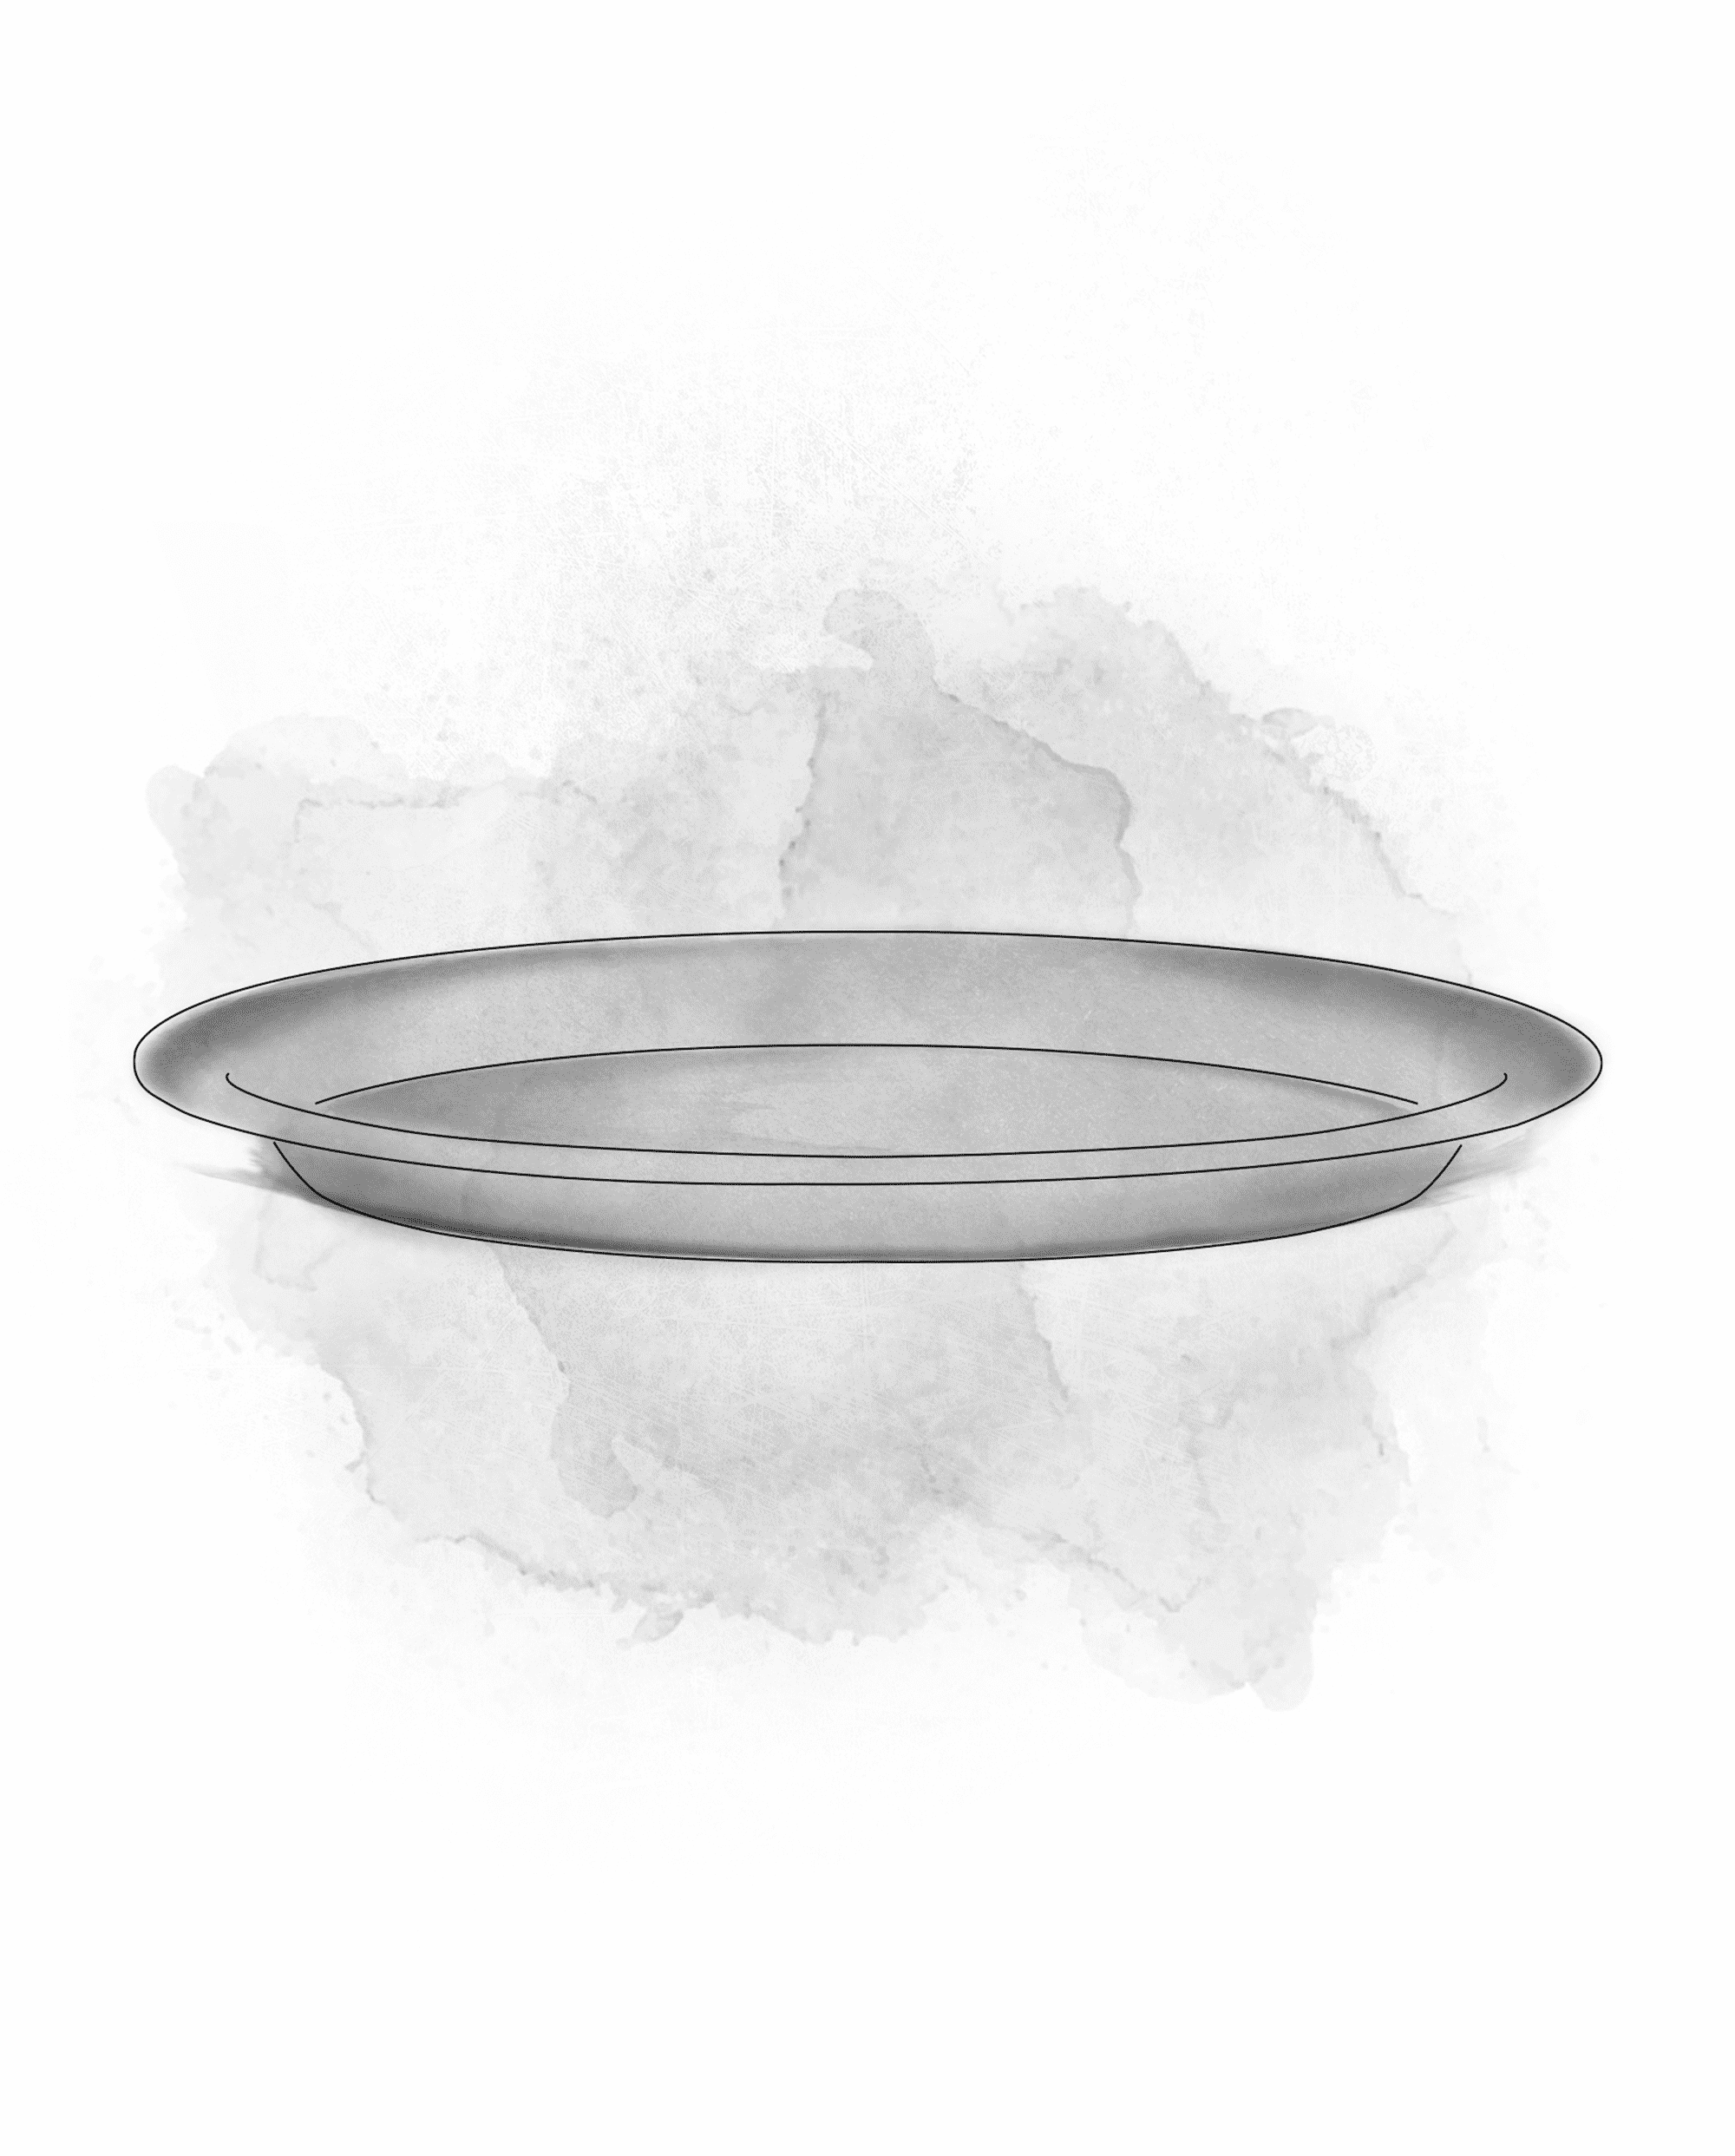 Oval plate 28x18.5 cm